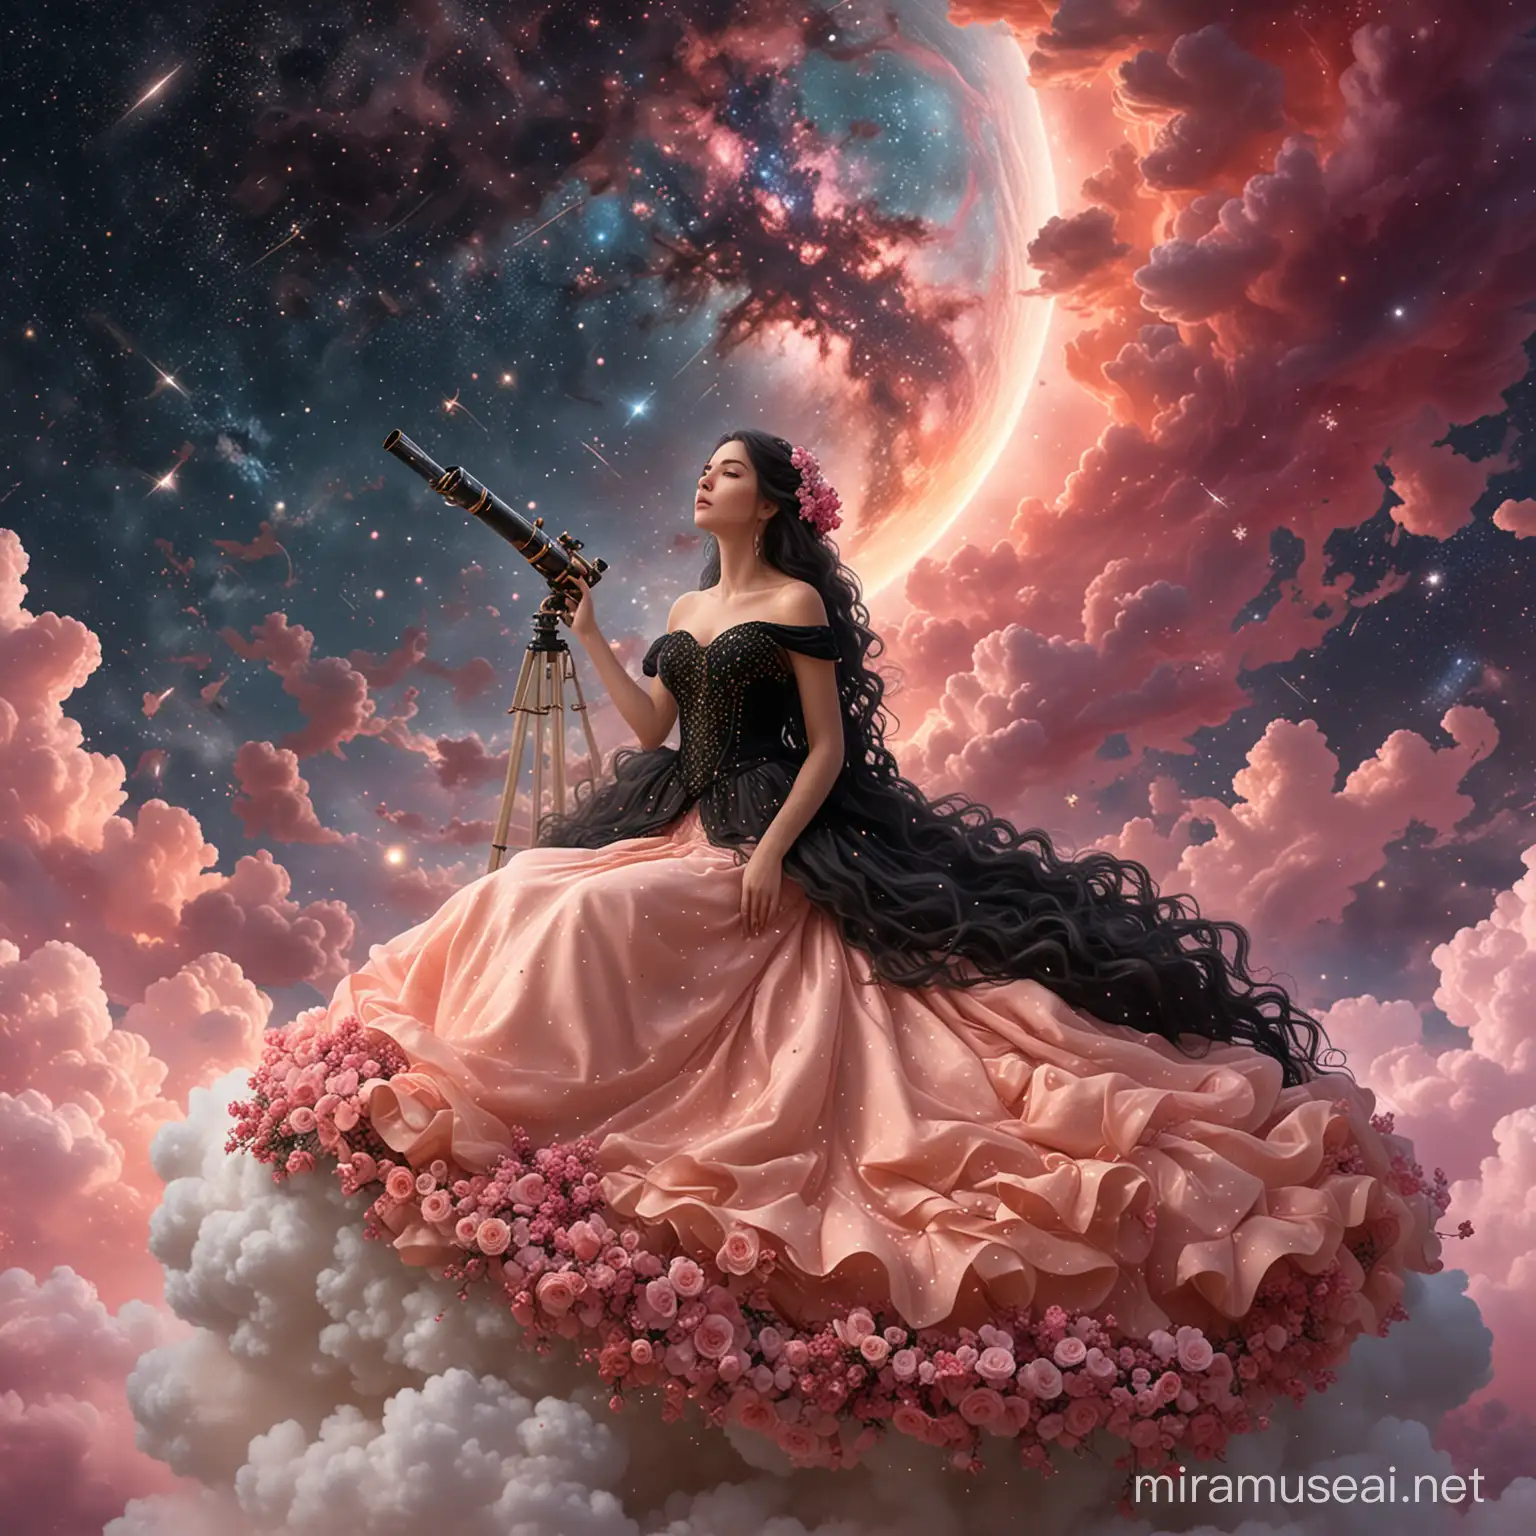 A beautiful woman, sitting on a cloud, watching the sky with her telescop, surrounded by small dark pink and beige flowers. Long wavy black hair. Elegant long salmon and black wedding dress, haute couture. Background nebula sky with golden light. Background constellation map. 8k, fantasy, illustration, digital art, illustration art, fantasy art, fantasy styl